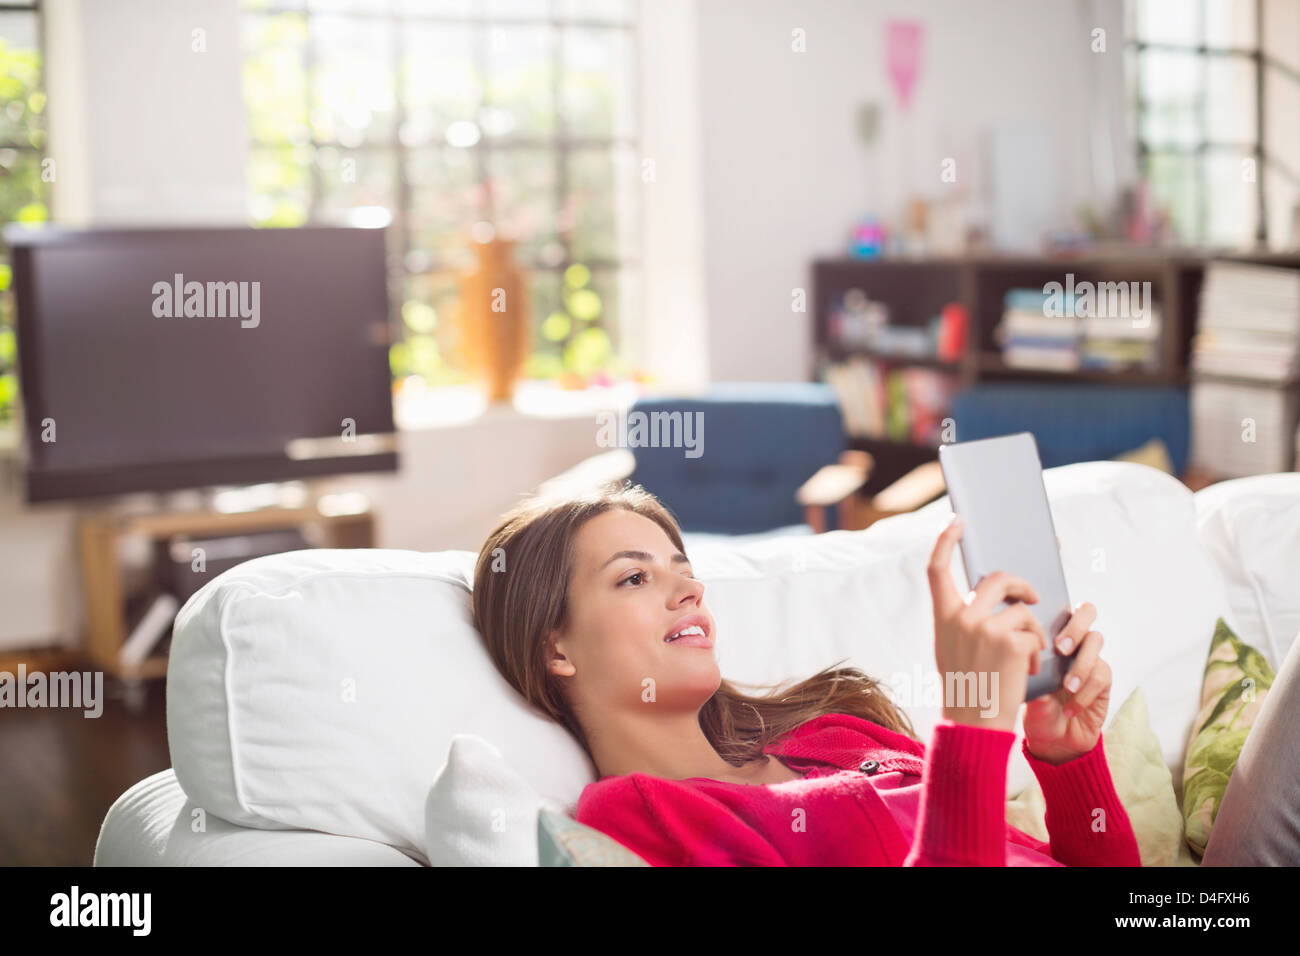 Woman using digital tablet on bed Stock Photo